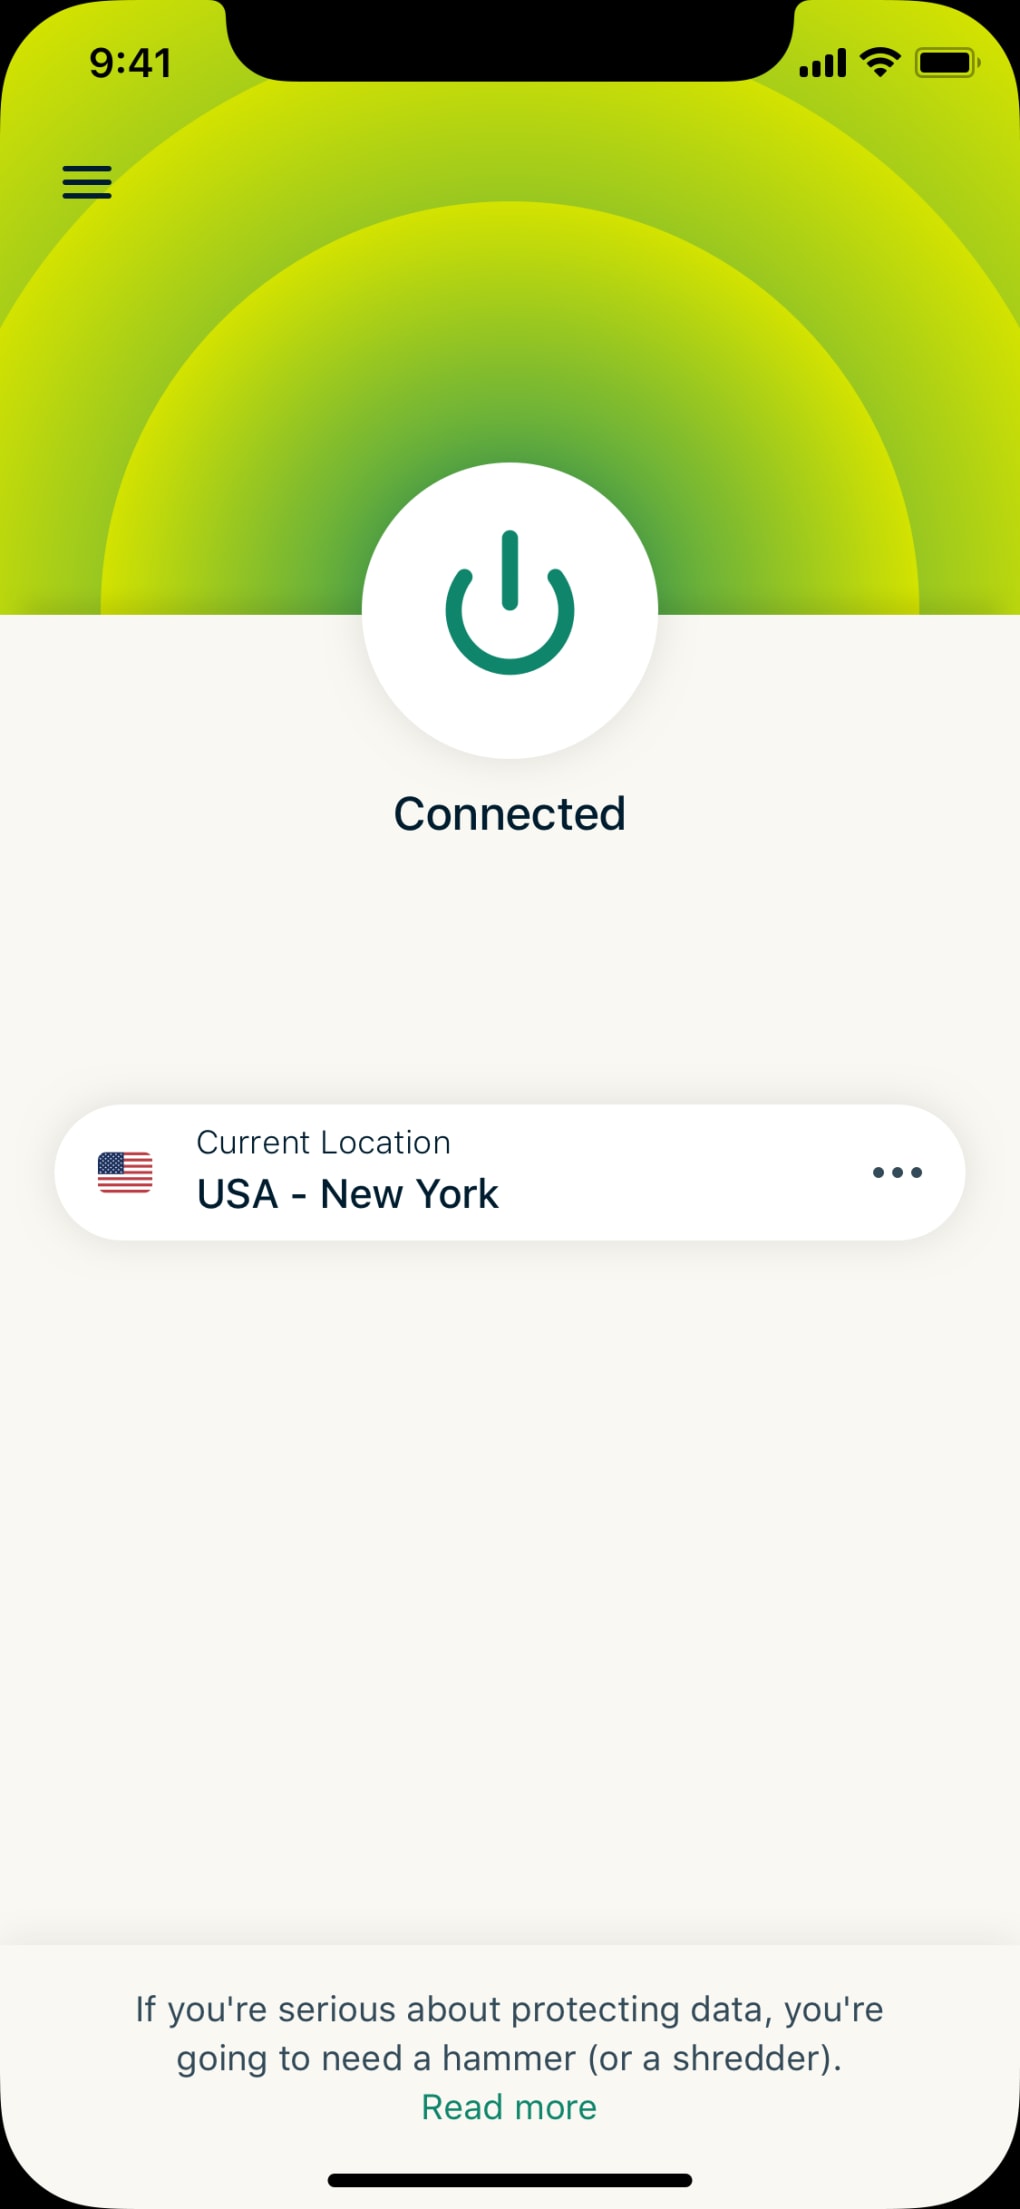 how to use vpn express on an iphone